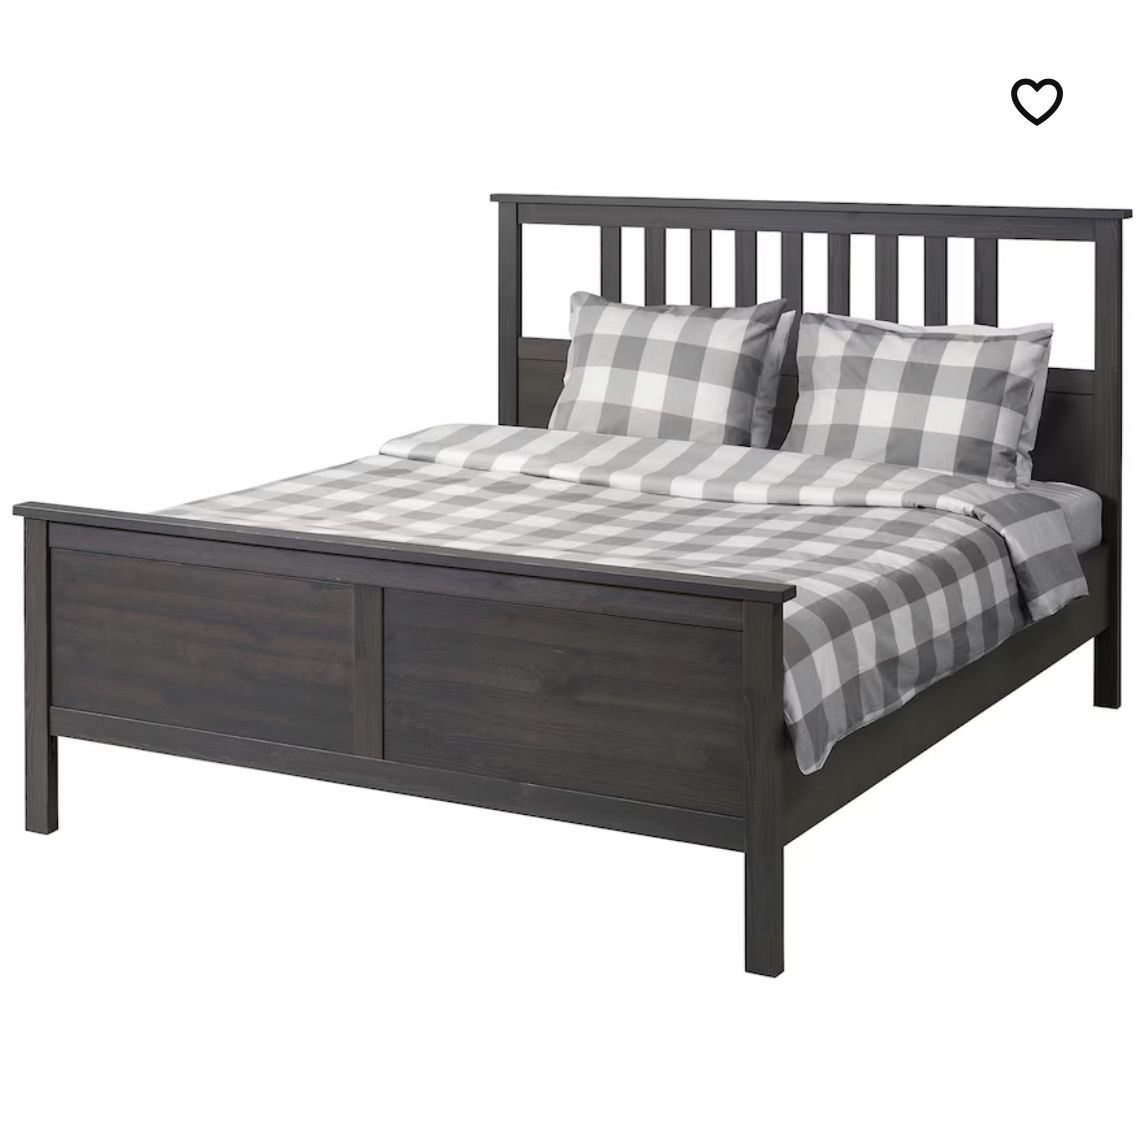 King Size IKEA bed frame 